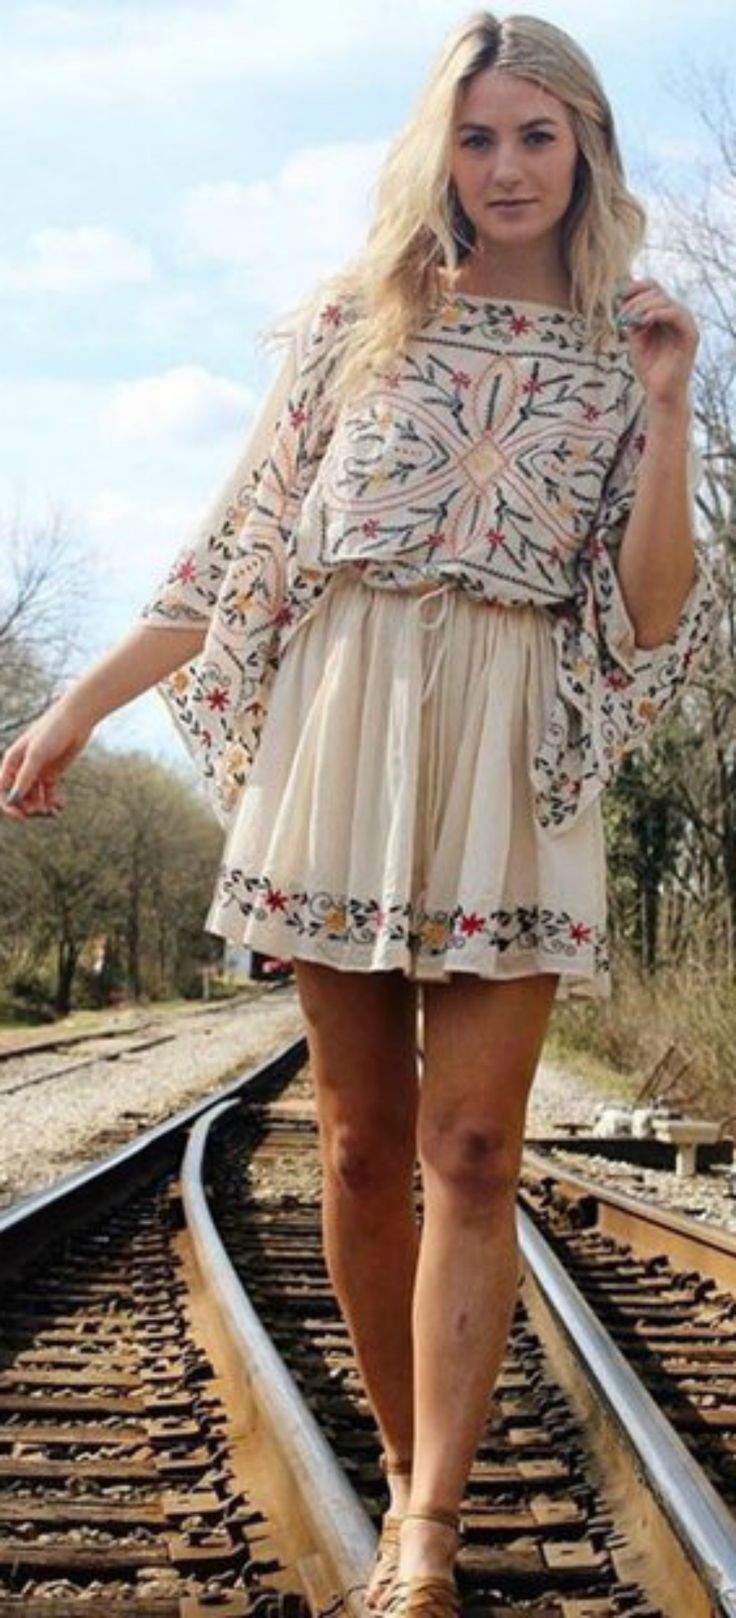 50 Boho Fashion Styles for Spring/Summer - Bohemian Chic Outfit Ideas